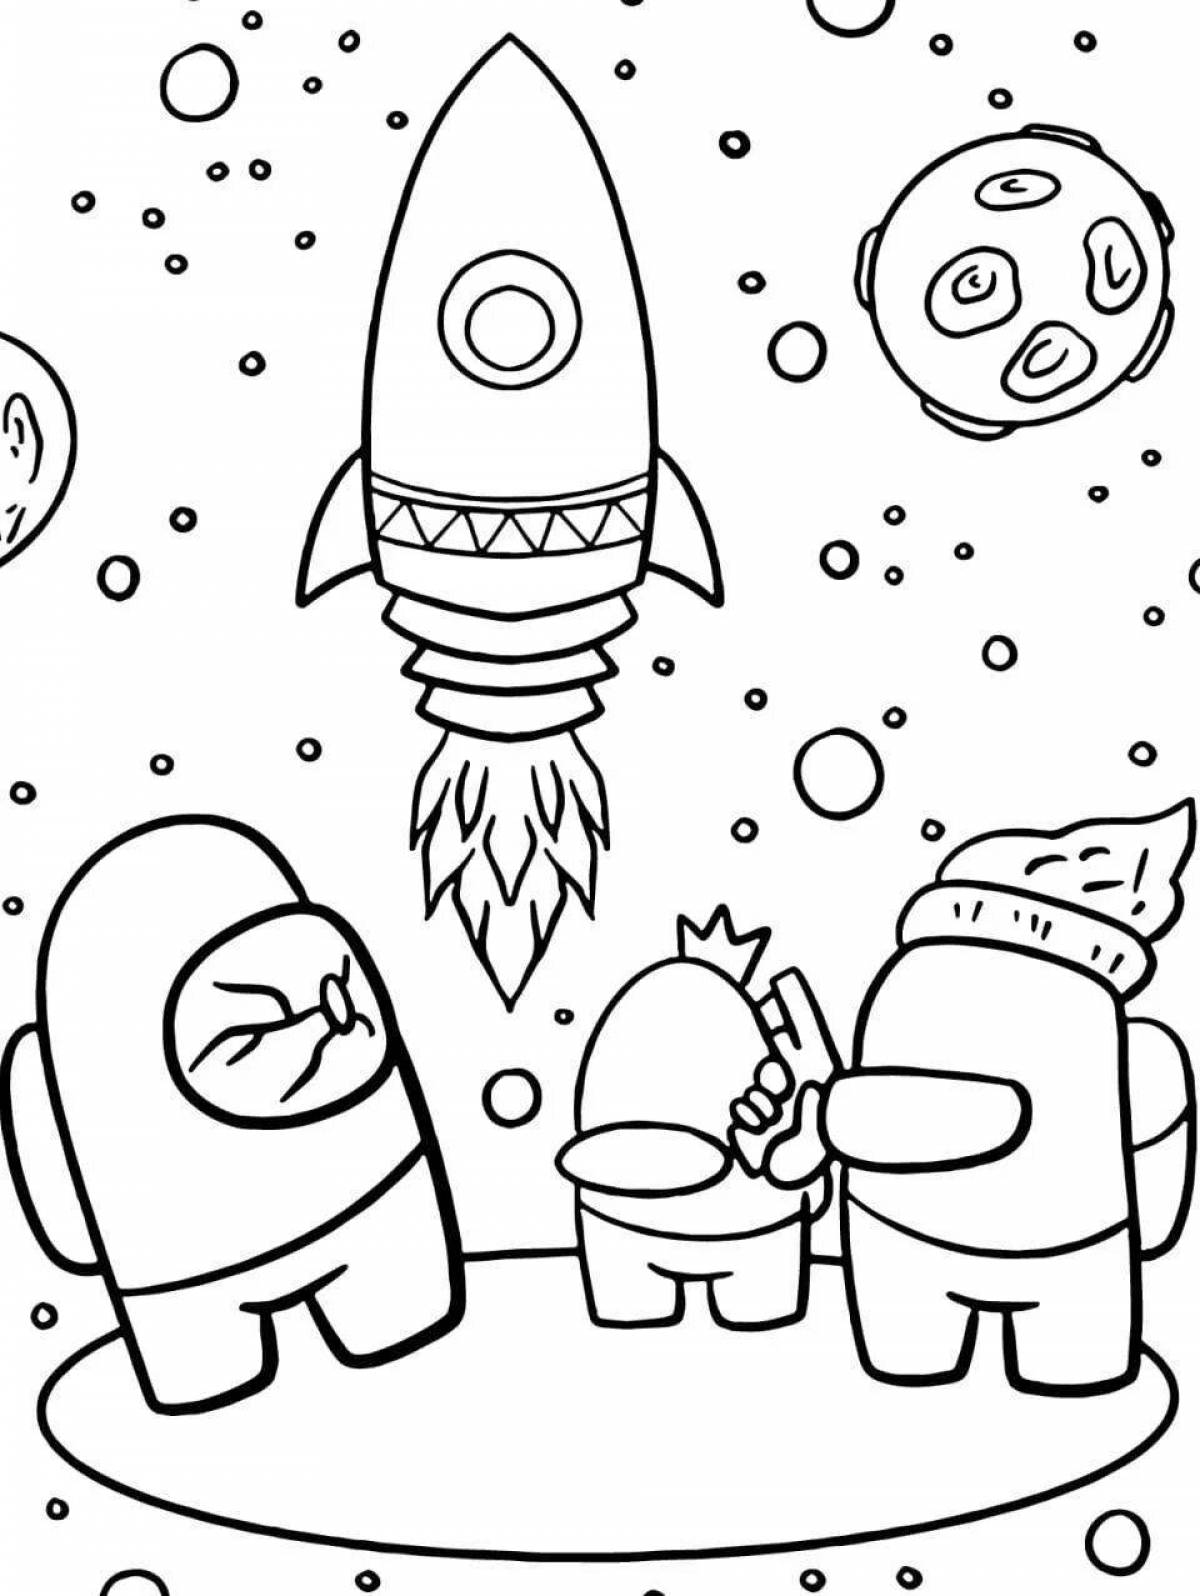 Funky among us spaceship coloring book